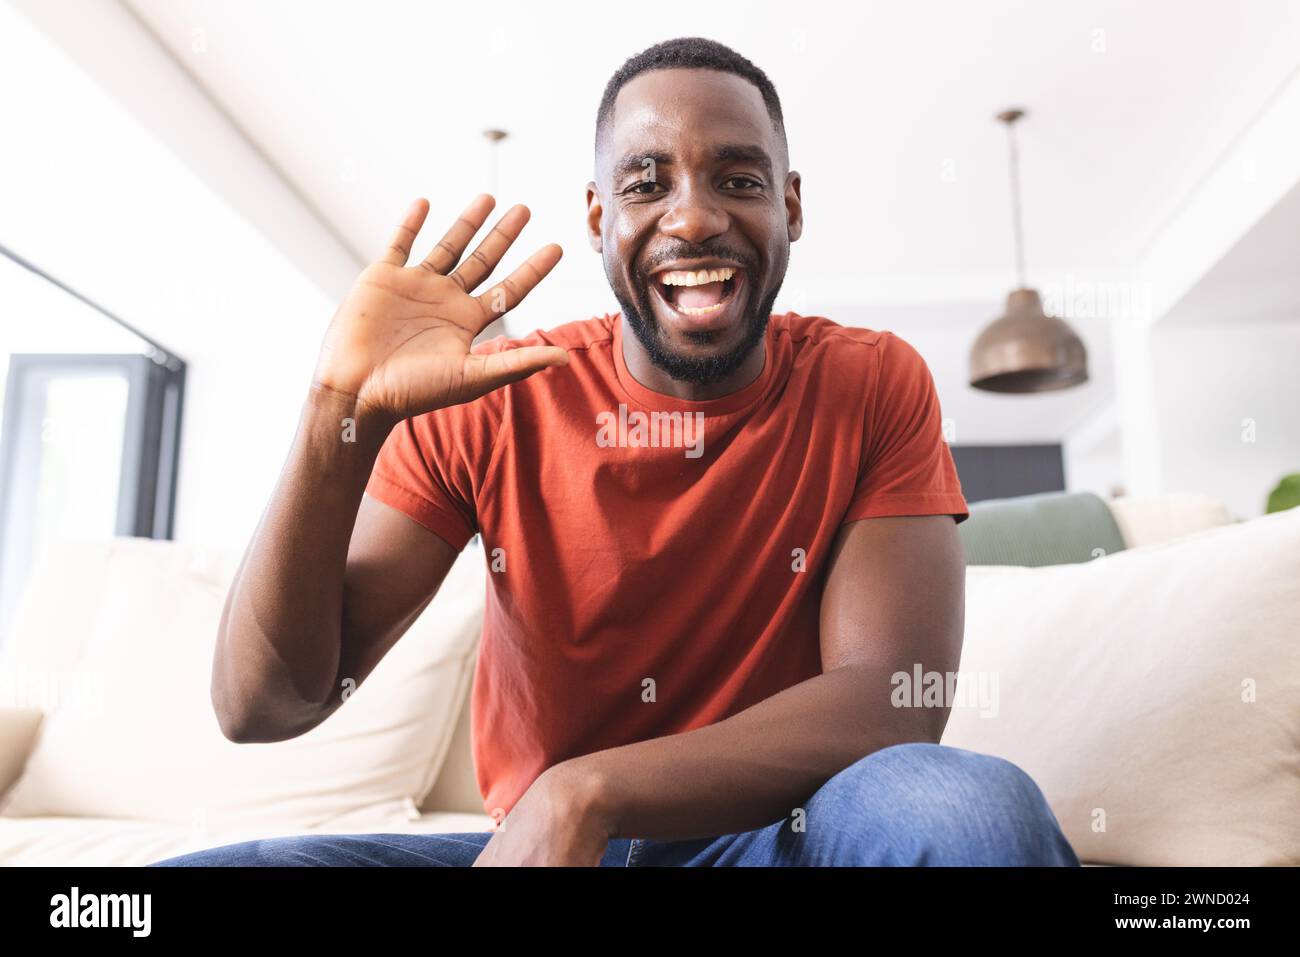 African American man in a red shirt waves with a bright smile on video call Stock Photo